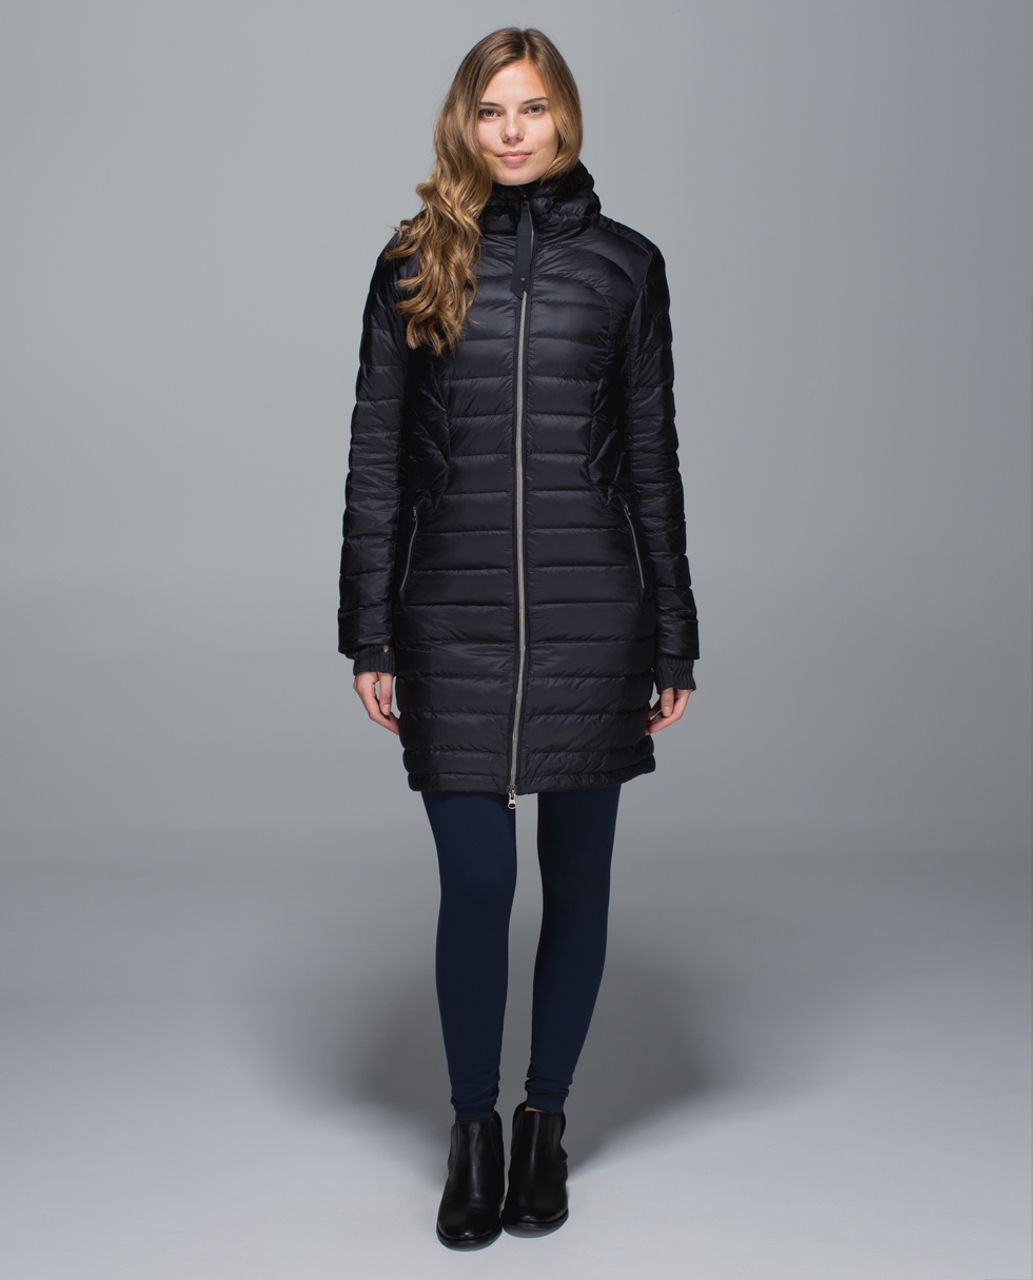 Lululemon 1x A Lady - Black (First Release)